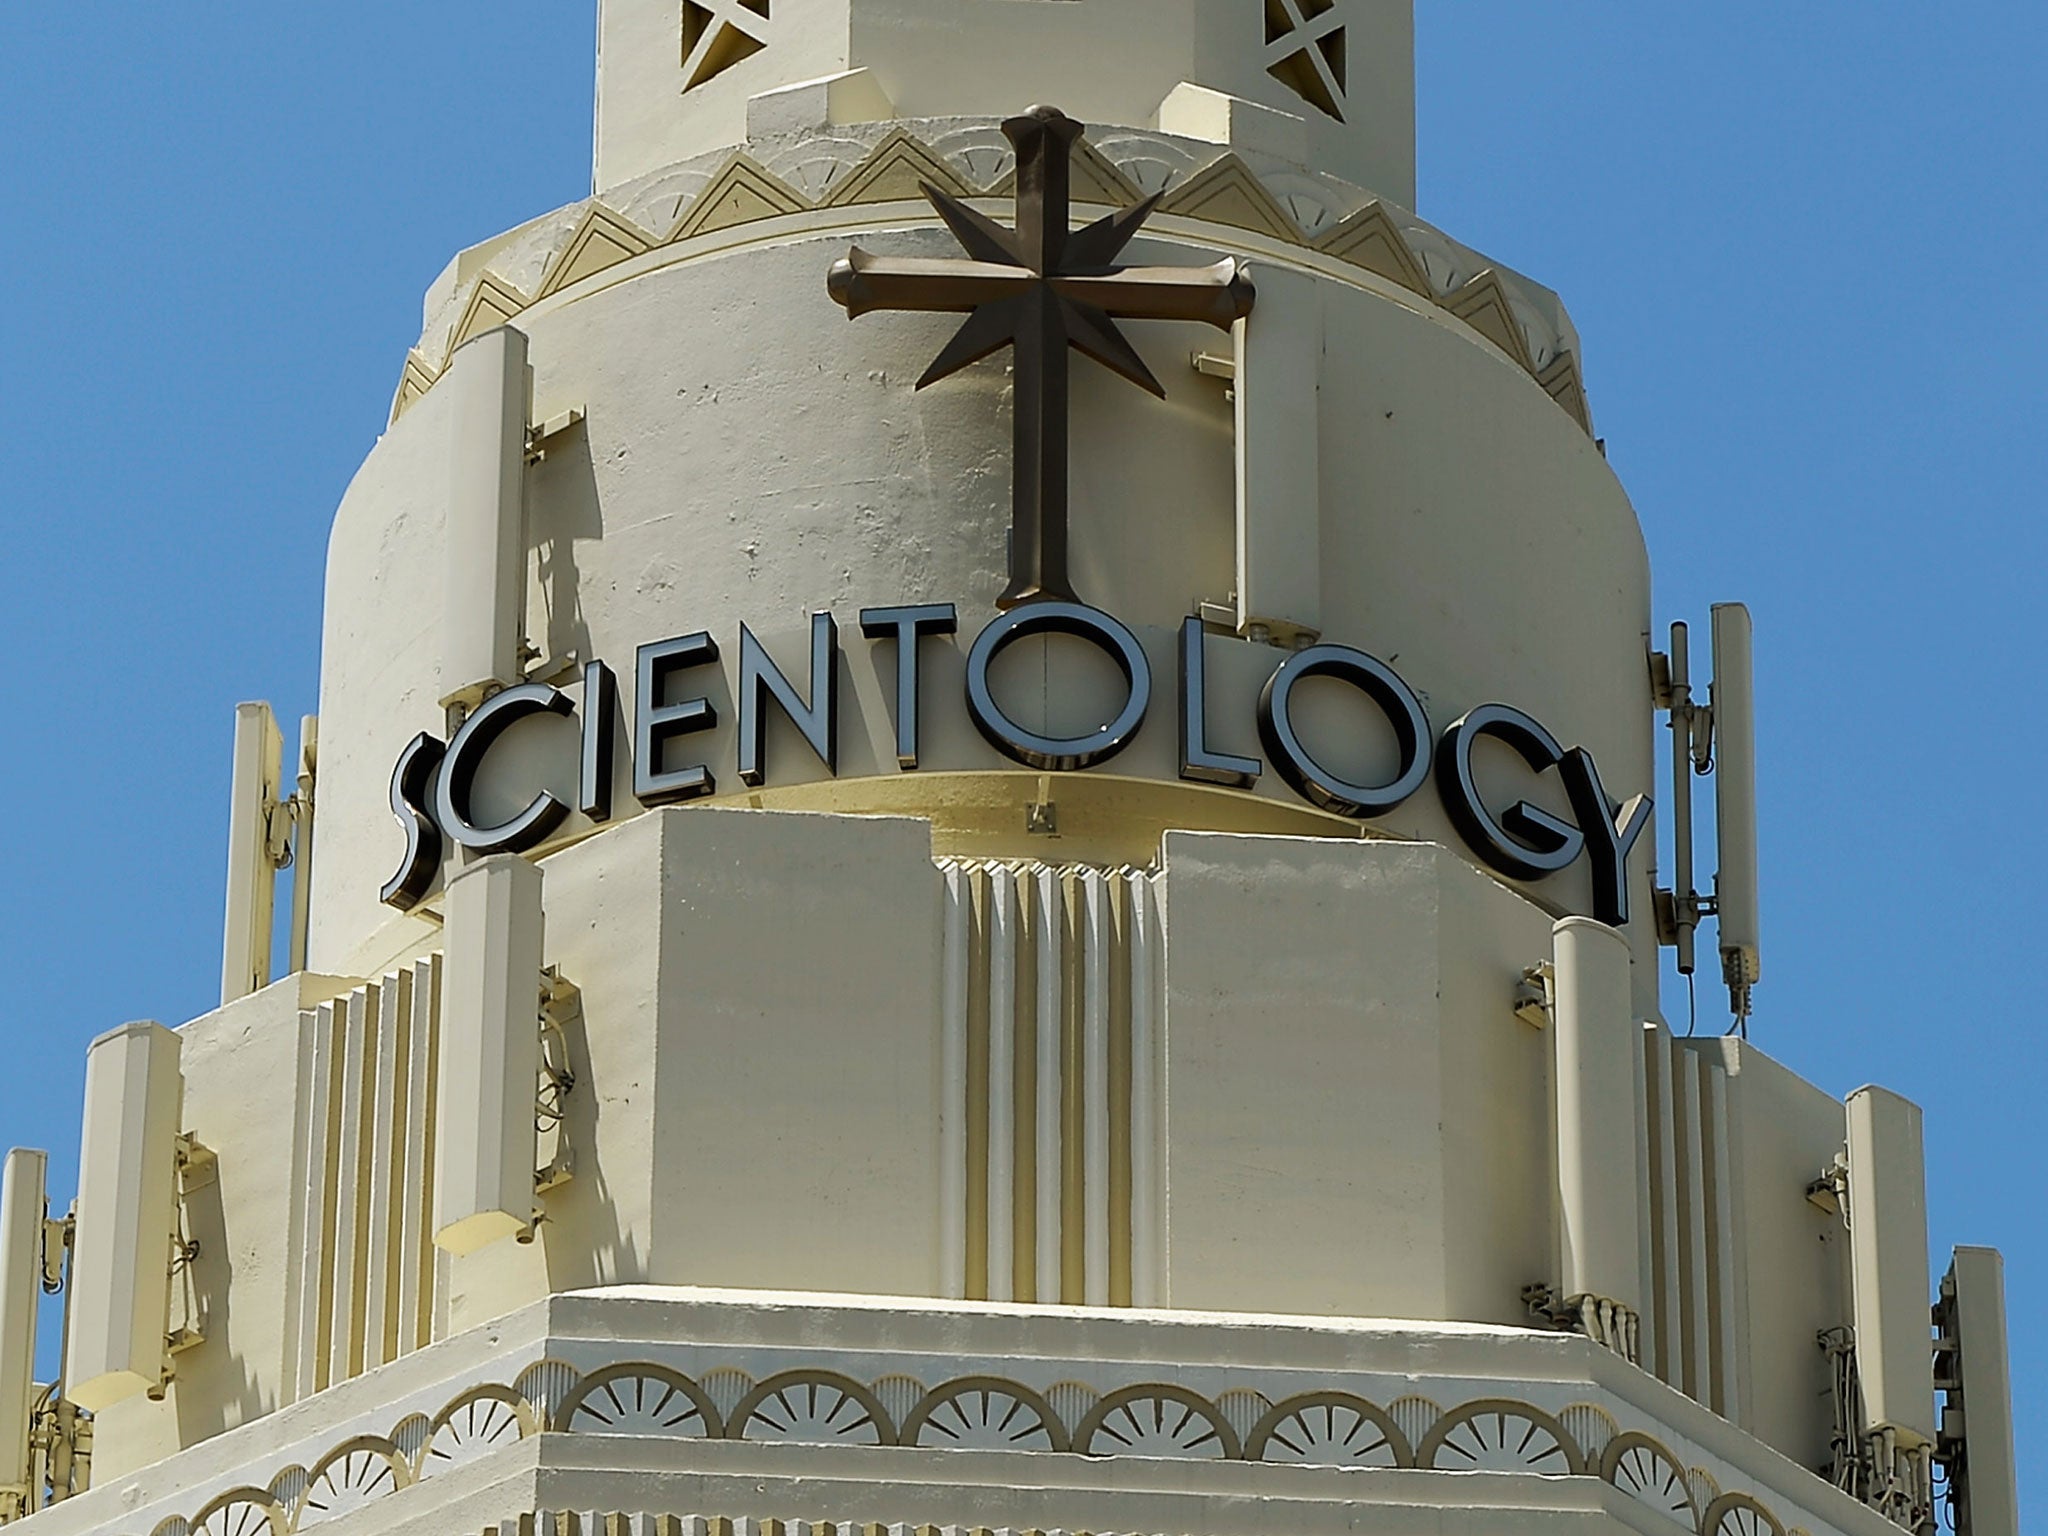 Scientology was first proposed by science fiction writer L Ron Hubbard and given religious status in the US in 1993